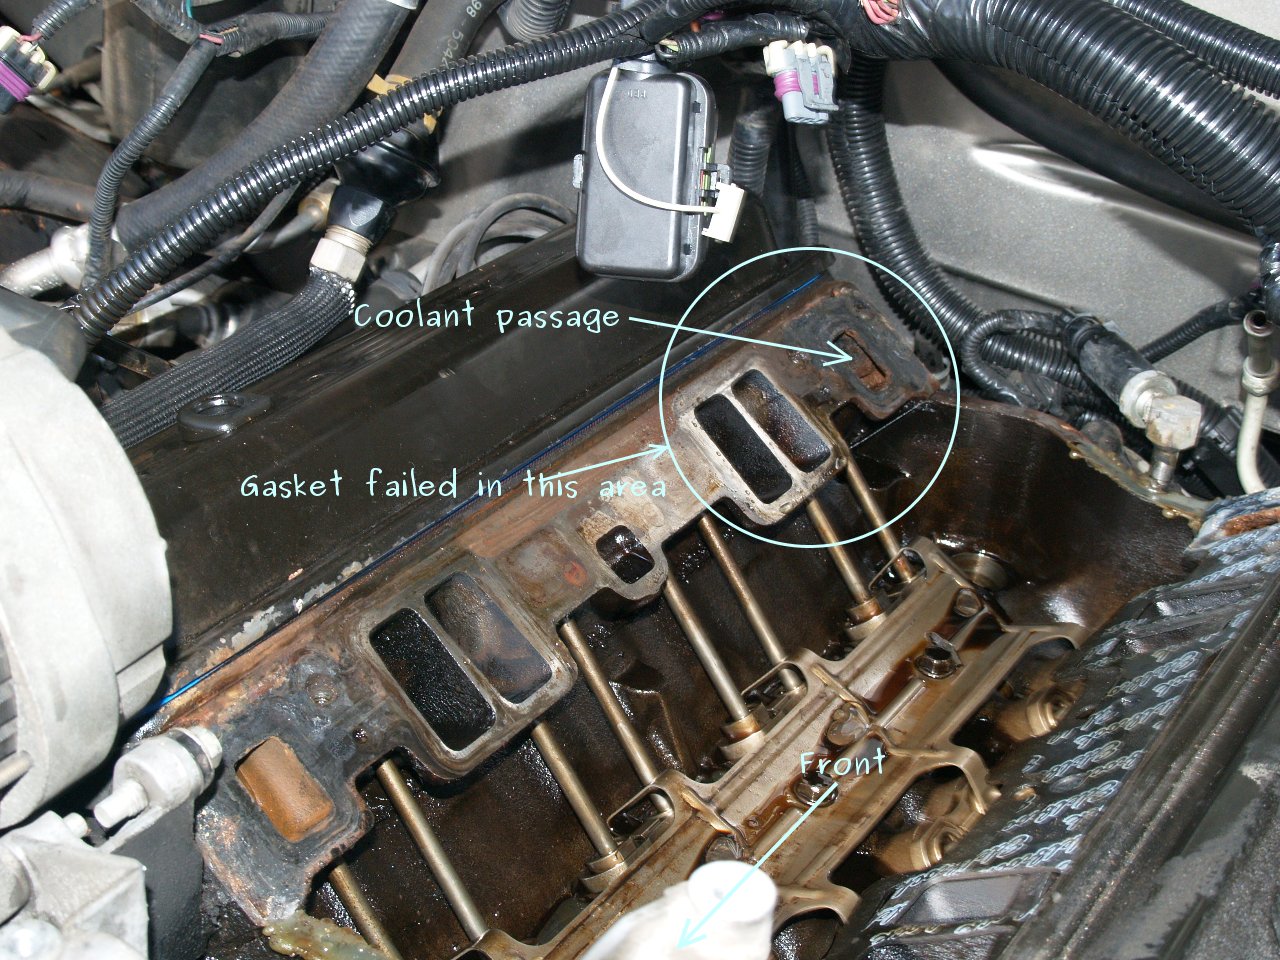 See P1CC1 in engine